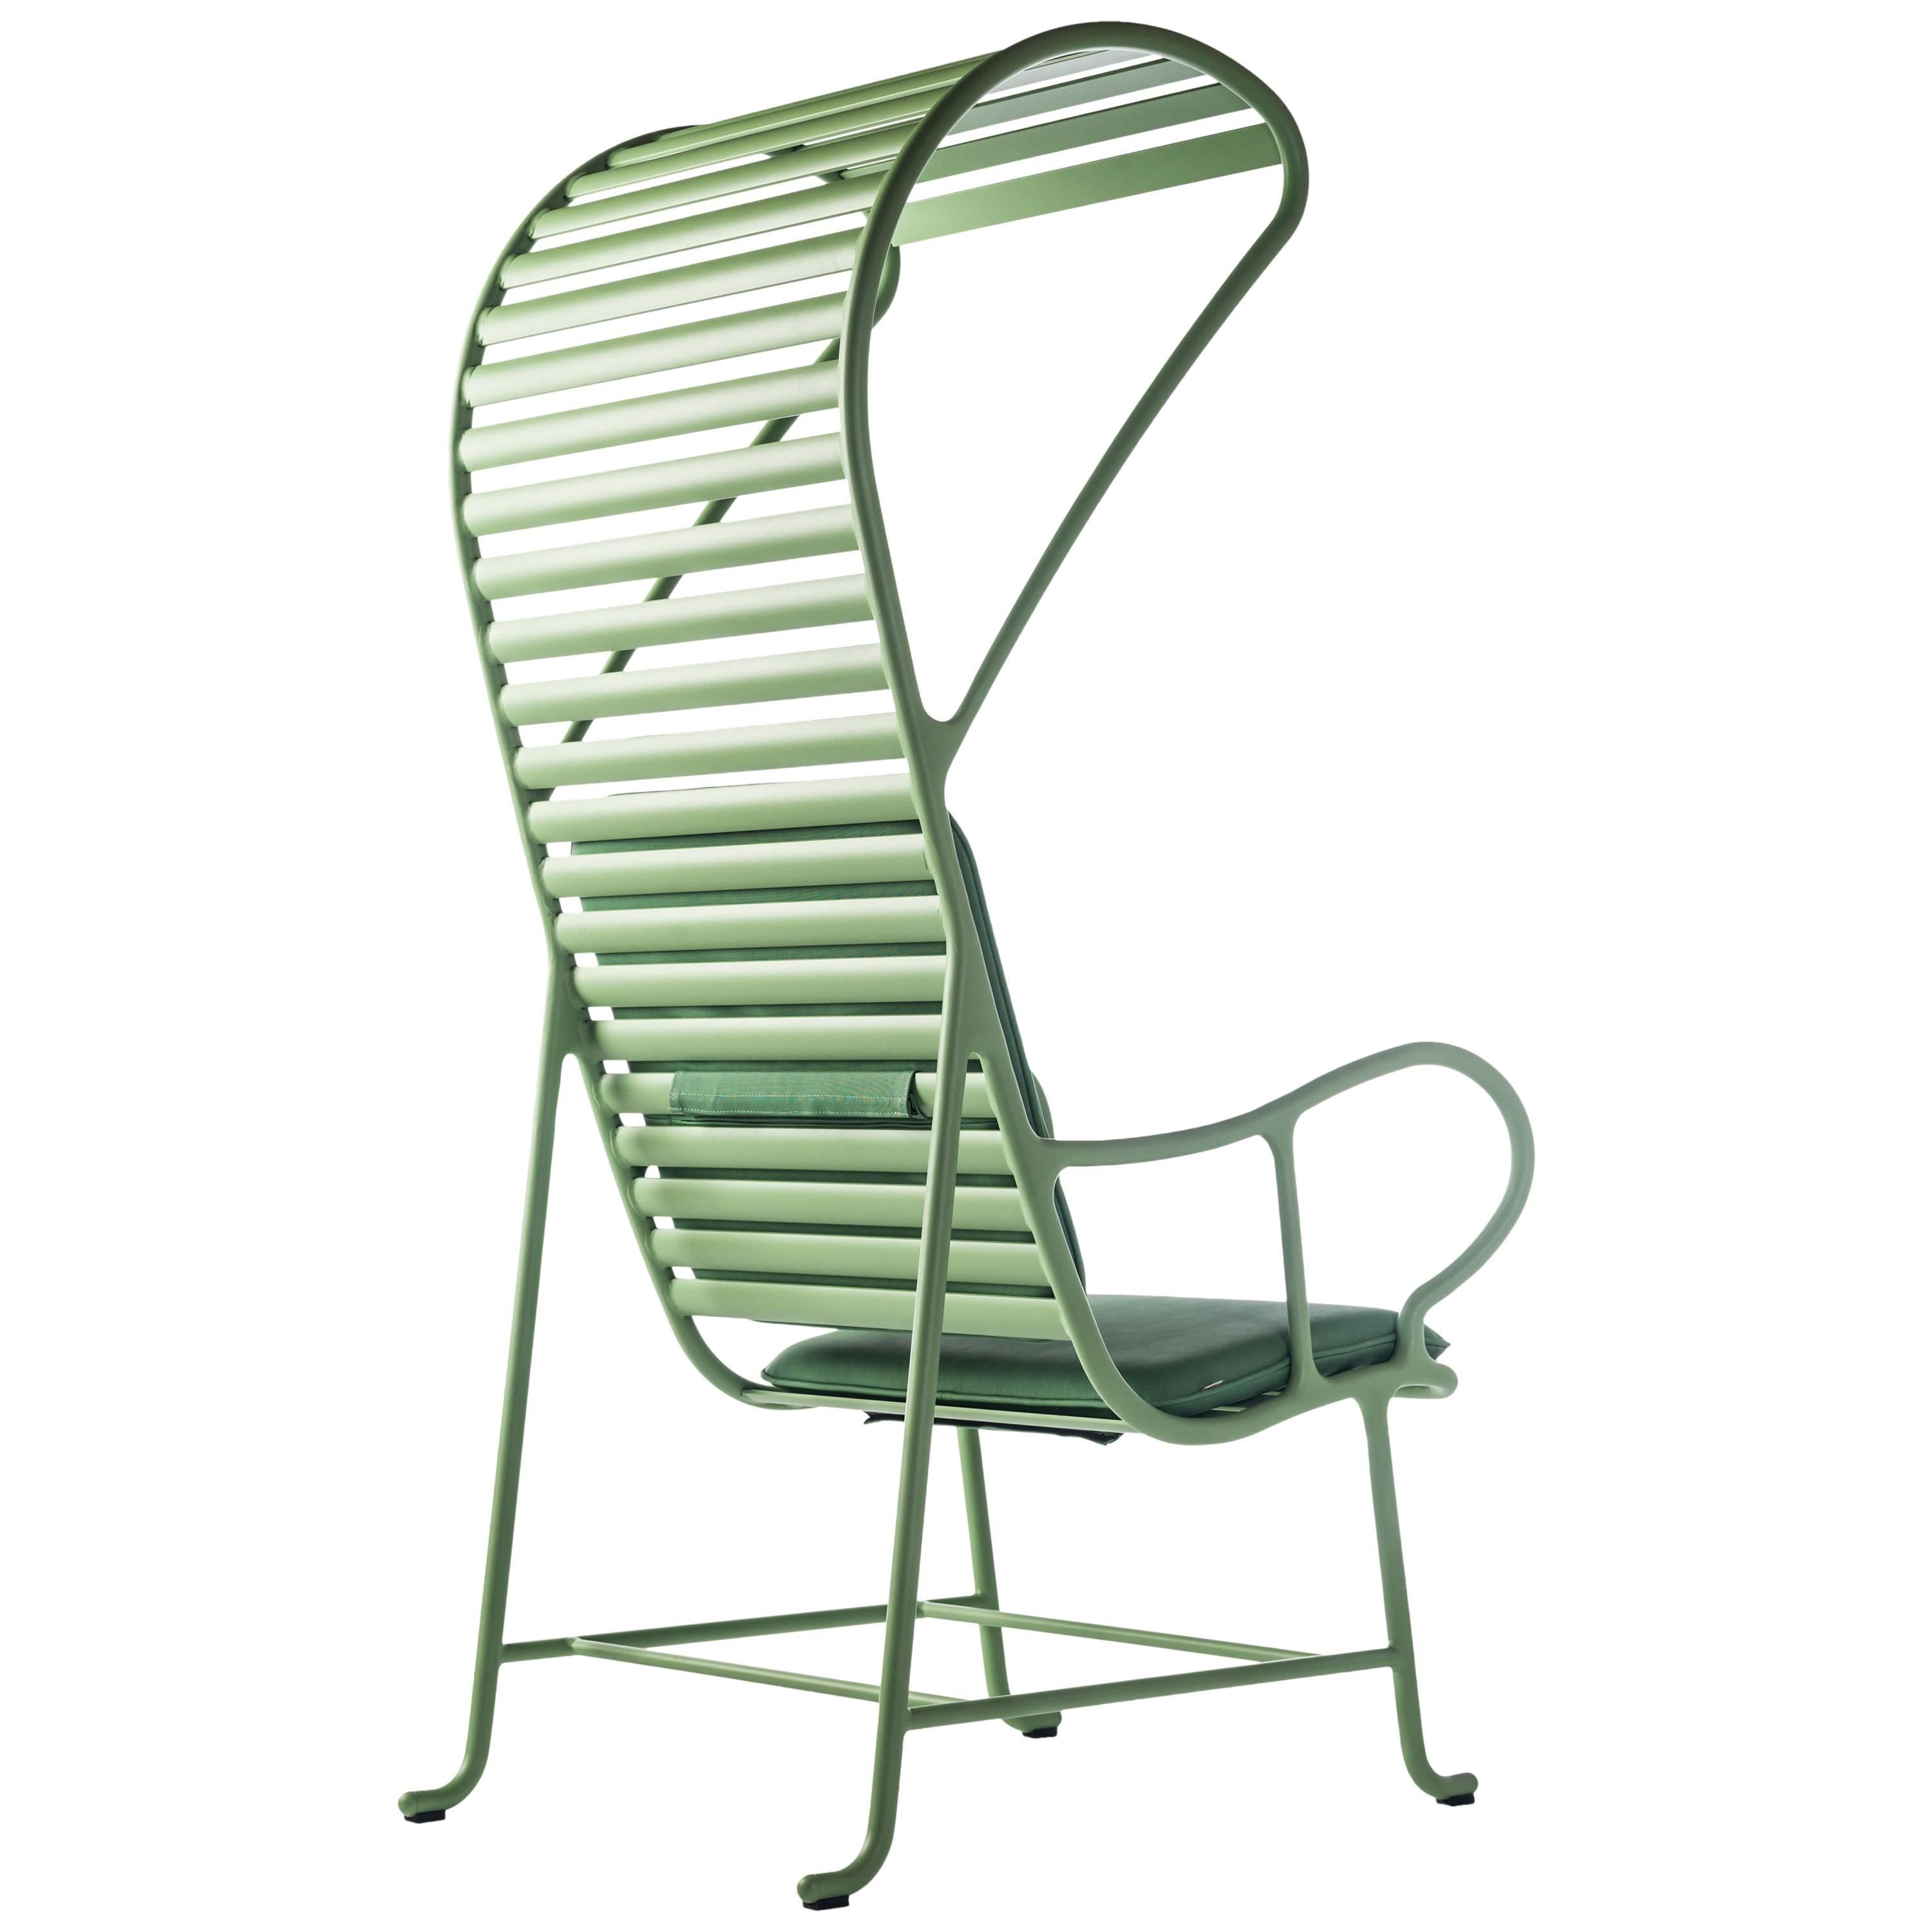 The Gardenias collection is the second largest collection by Jaime Hayon for BD.

Structure made of cast and extruded aluminium. Powder-coated green (RAL 6021) with Alesta by Axalta.
Removable upholstery and removable cushion covers, waterproof